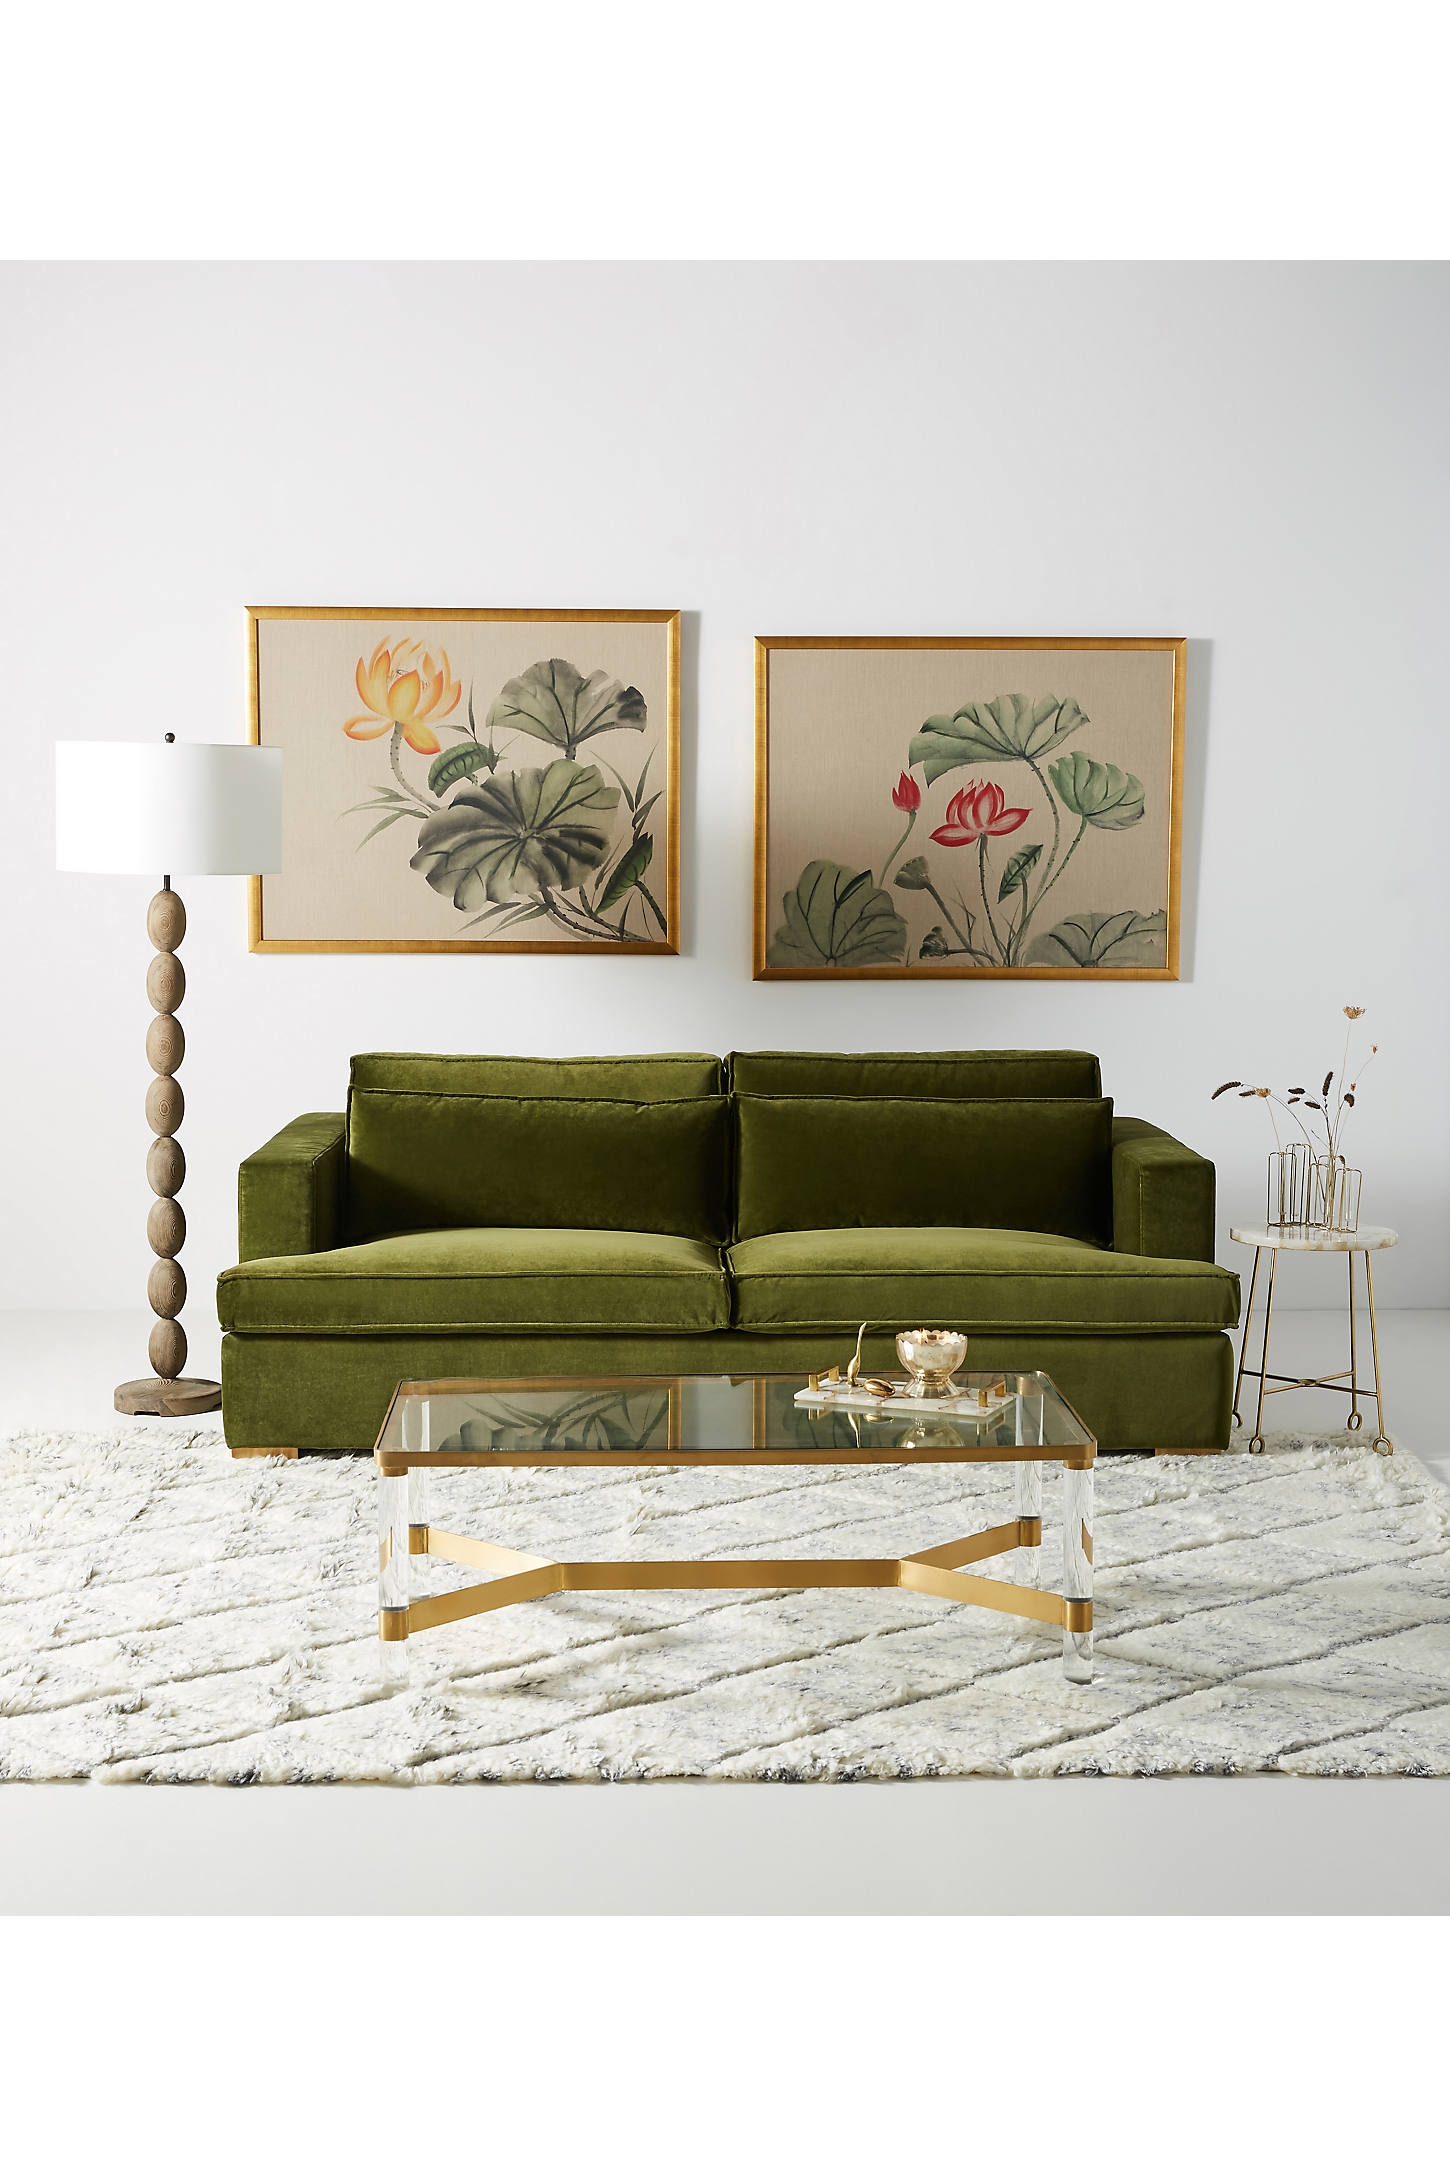 King Sofa By Anthropologie in Assorted Size 90" - Image 0